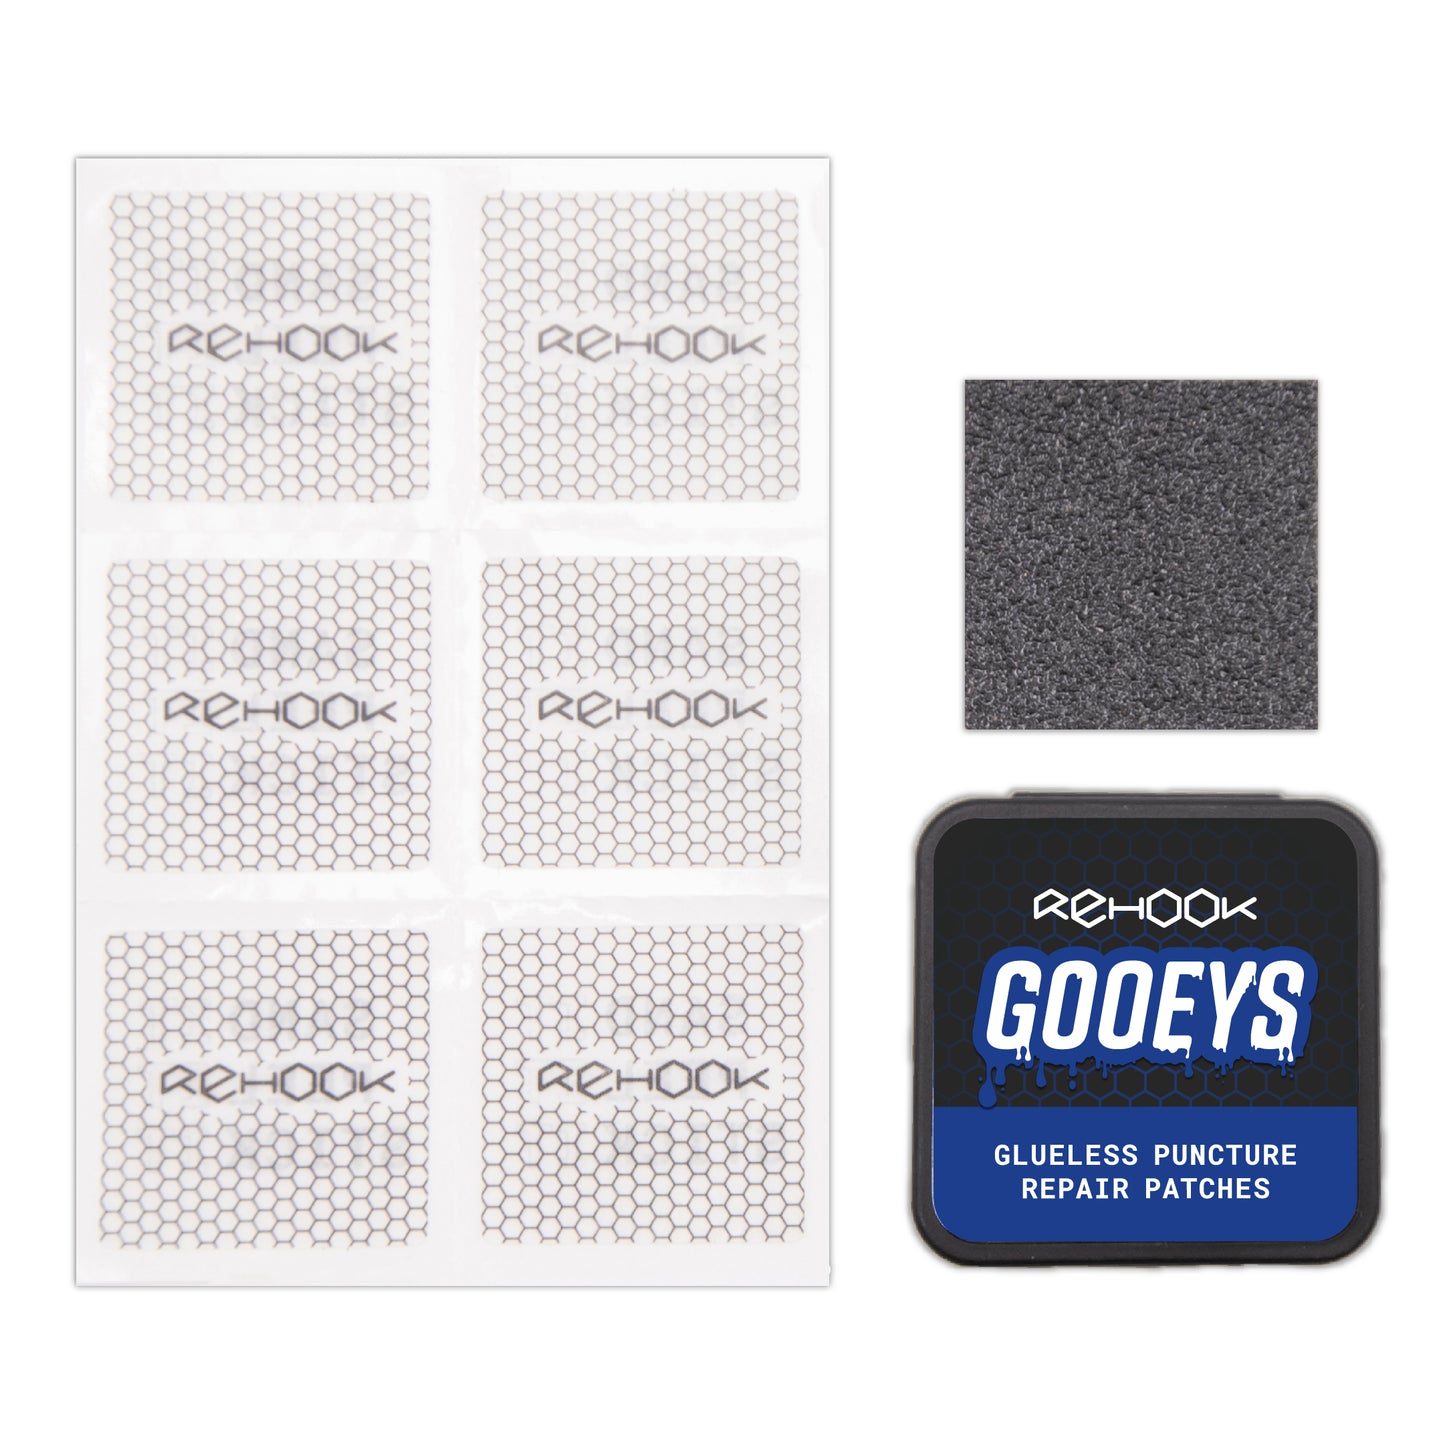 Rehook Gooeys Glueless Puncture Repair Patches